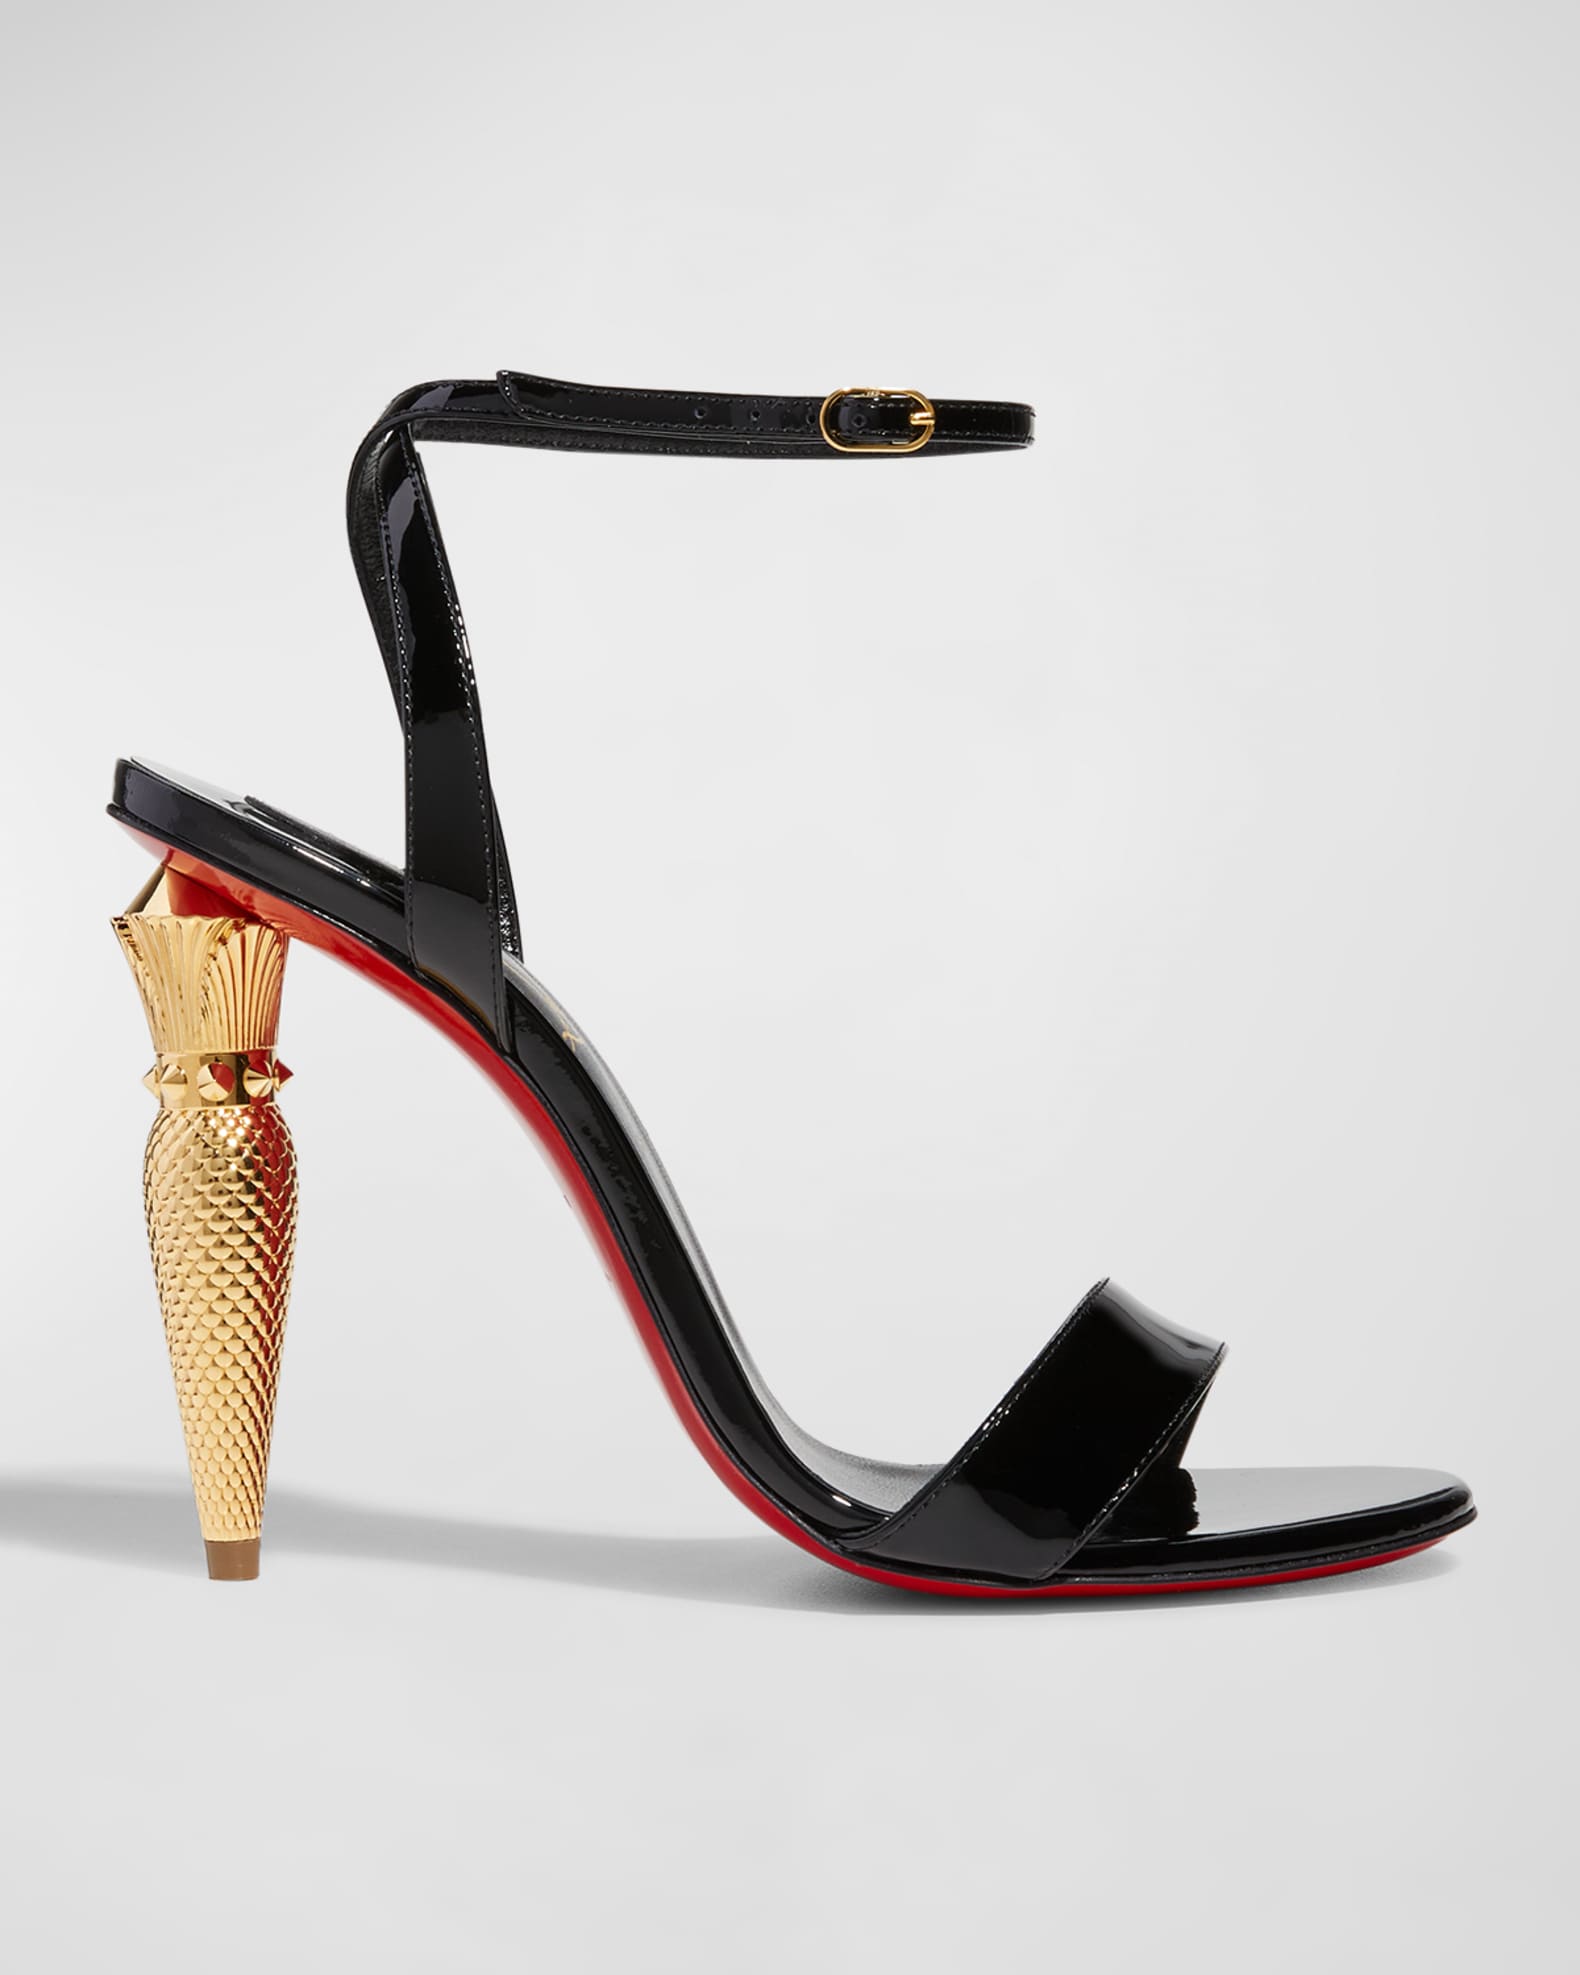 Christian Louboutin Lip Queen Patent Red Sole Sandals | Neiman Marcus